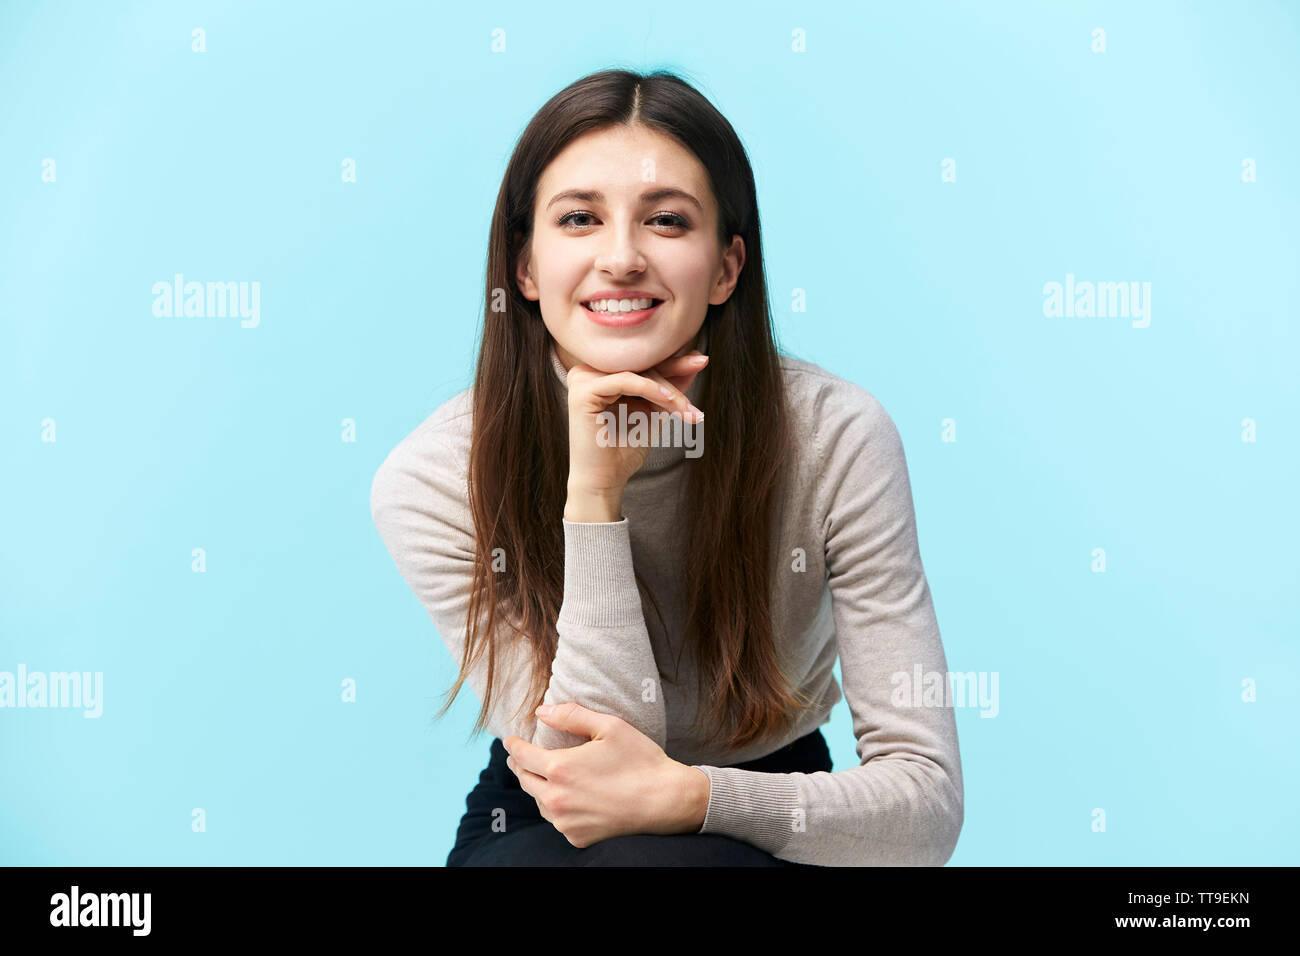 portrait of a beautiful young caucasian woman, happy and smiling, looking at camera, hand on chin, isolated on blue background Stock Photo